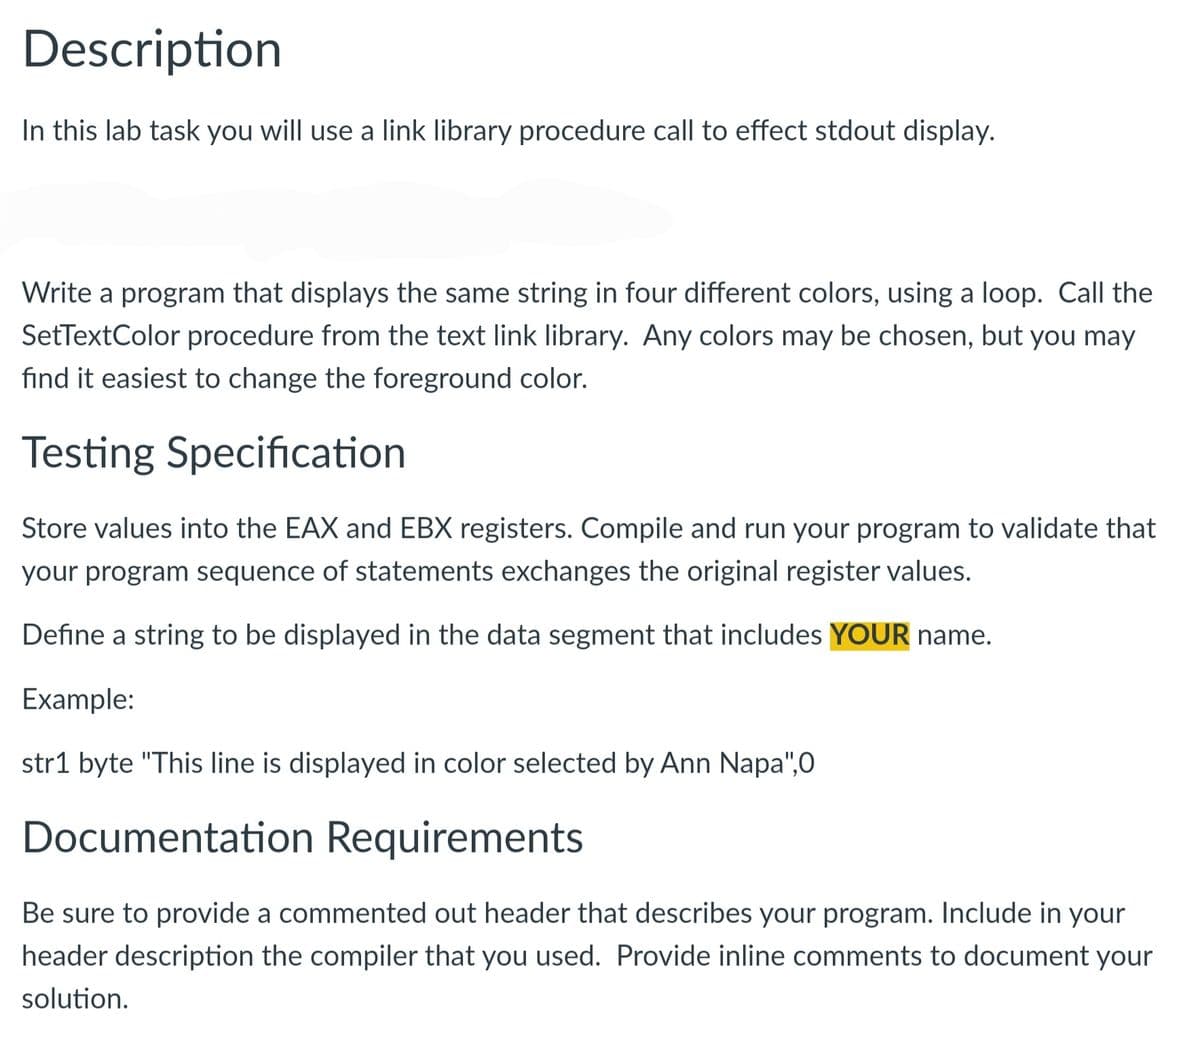 Description
In this lab task you will use a link library procedure call to effect stdout display.
Write a program that displays the same string in four different colors, using a loop. Call the
SetTextColor procedure from the text link library. Any colors may be chosen, but you may
find it easiest to change the foreground color.
Testing Specification
Store values into the EAX and EBX registers. Compile and run your program to validate that
your program sequence of statements exchanges the original register values.
Define a string to be displayed in the data segment that includes YOUR name.
Example:
str1 byte "This line is displayed in color selected by Ann Napa",O
Documentation Requirements
Be sure to provide a commented out header that describes your program. Include in your
header description the compiler that you used. Provide inline comments to document your
solution.
